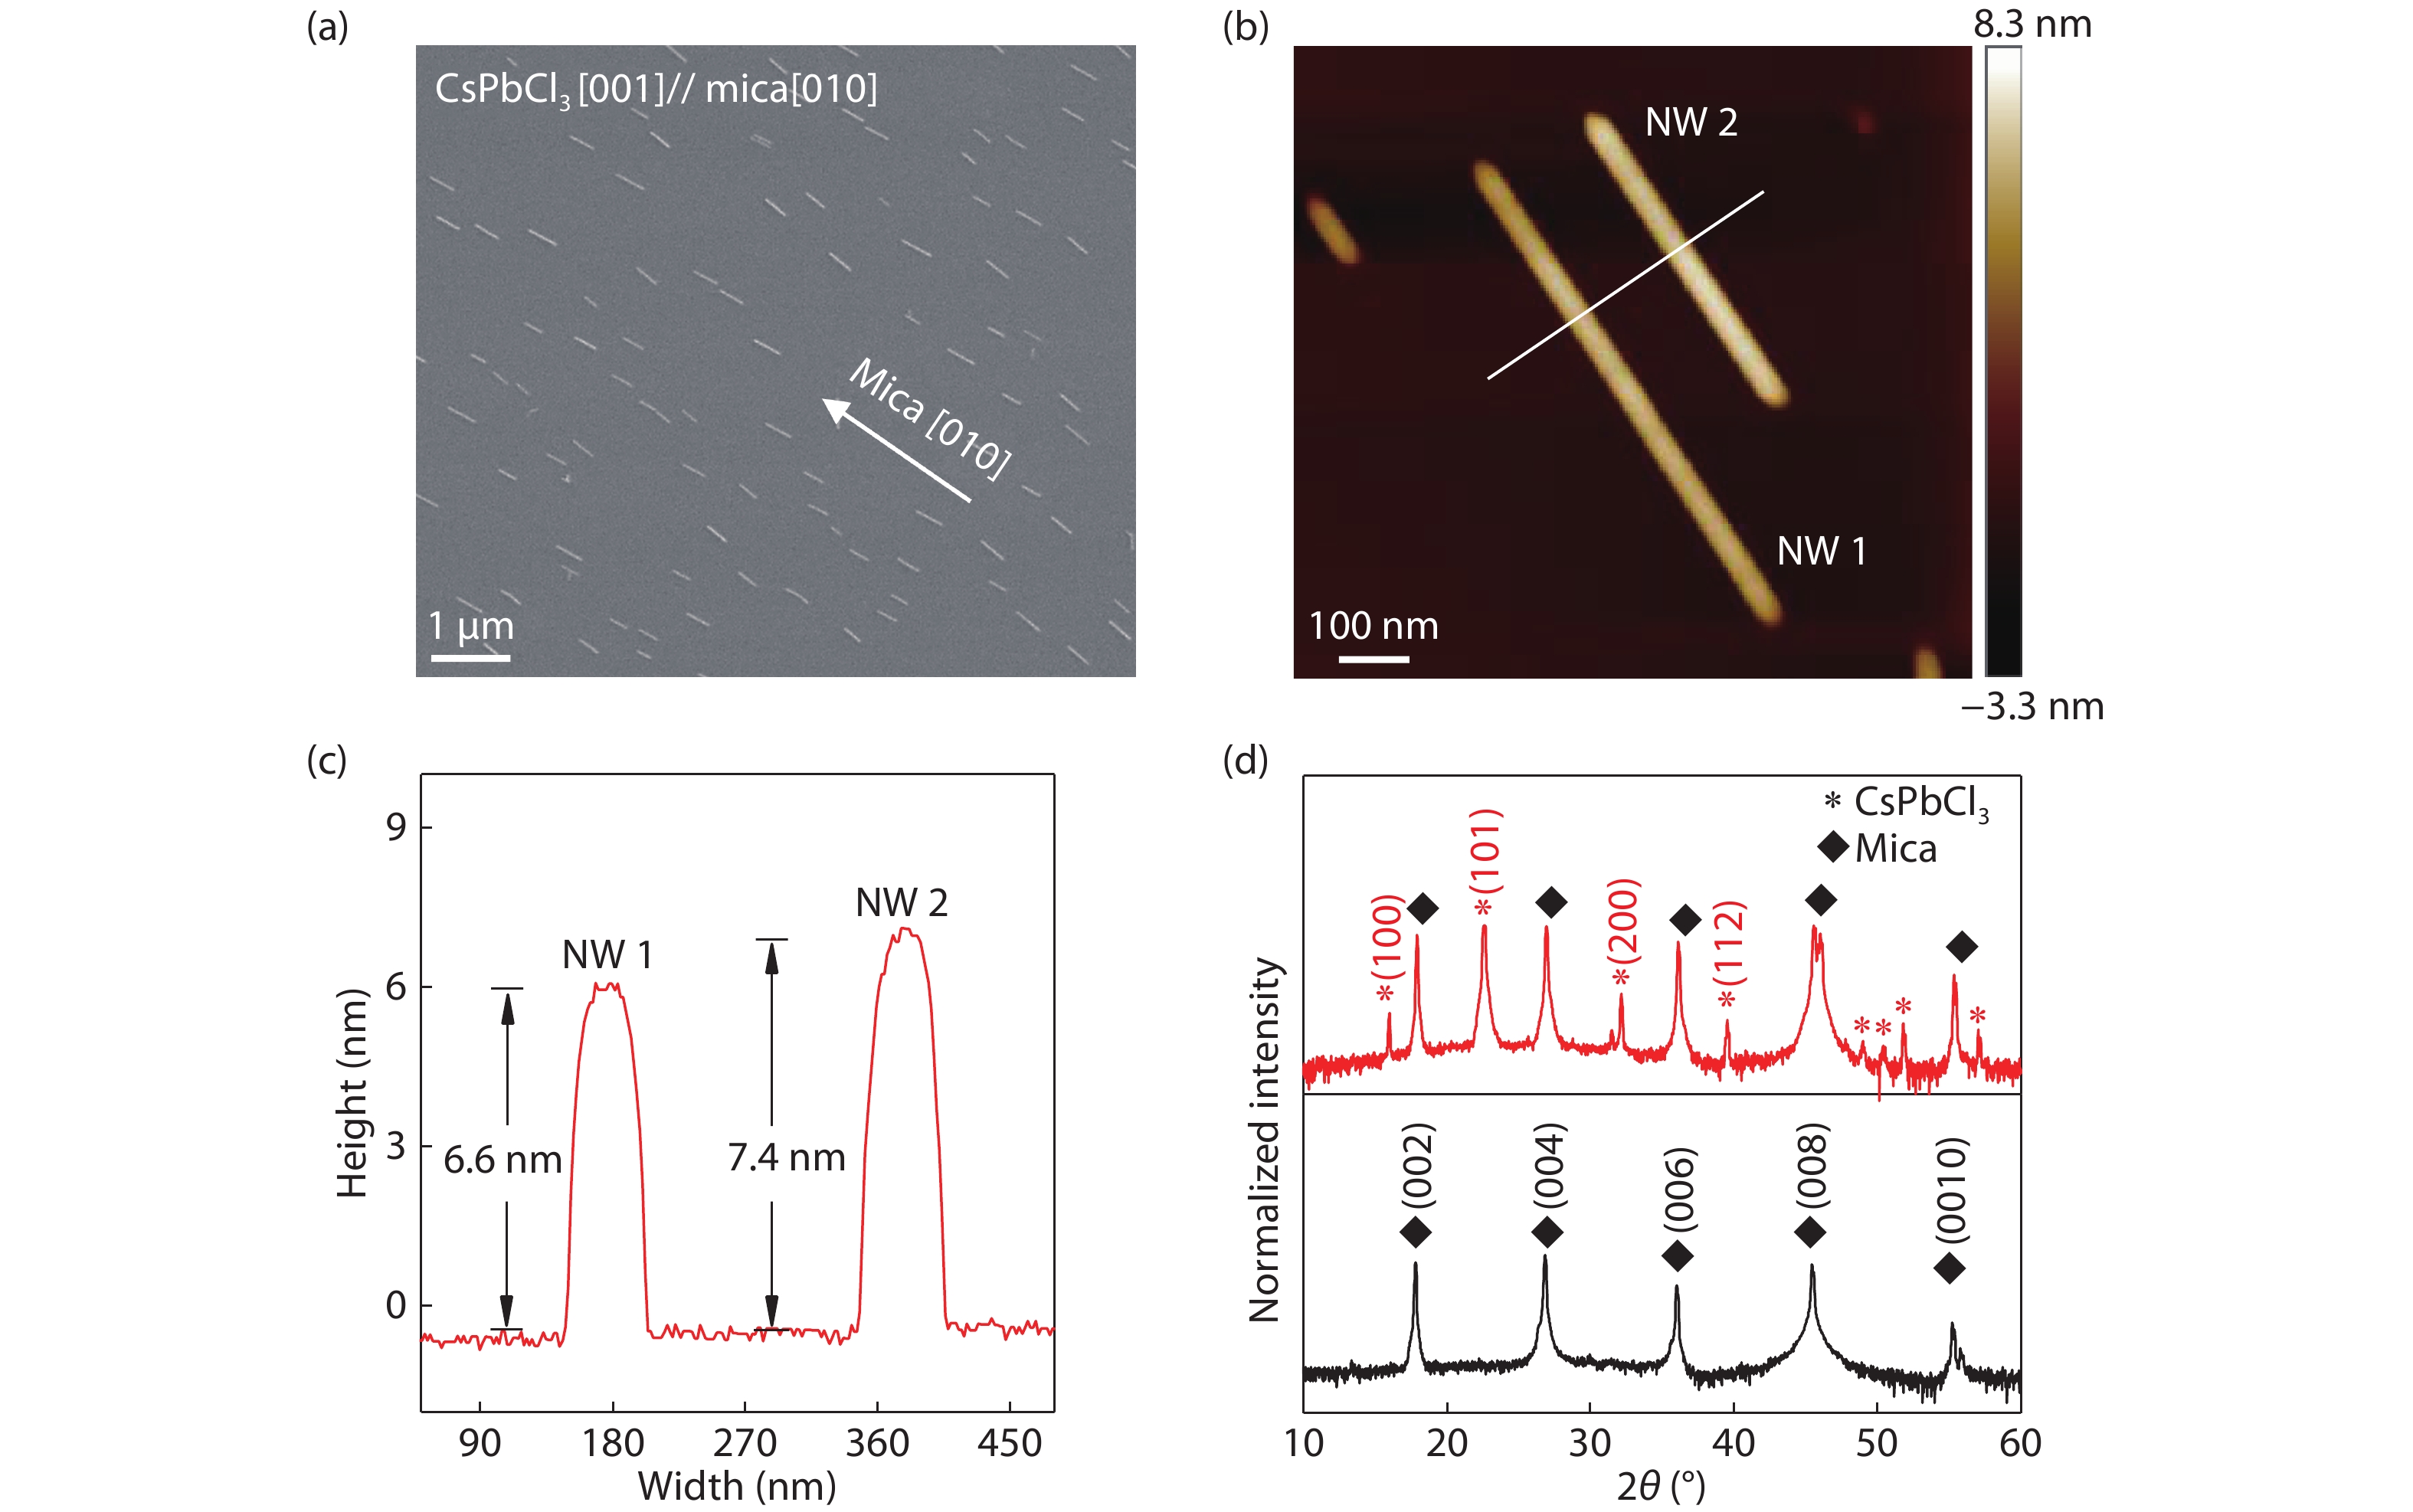 (Color online) The structure and morphology characterization of ultrathin CsPbCl3 nanowires (NWs) epitaxial on mica. (a) Scanning electron microscopy (SEM) image of the ultrathin CsPbCl3 NWs grown on (001)-mica by chemical vapor deposition method. (b) Atomic force microscopy (AFM) image of the CsPbCl3 NWs, scale bar: 100 nm. (c) Corresponding data of CsPbCl3 NWs height extracted from (b). (d) X-ray diffraction pattern of the CsPbCl3 NWs on mica (red line) and mica (black line).